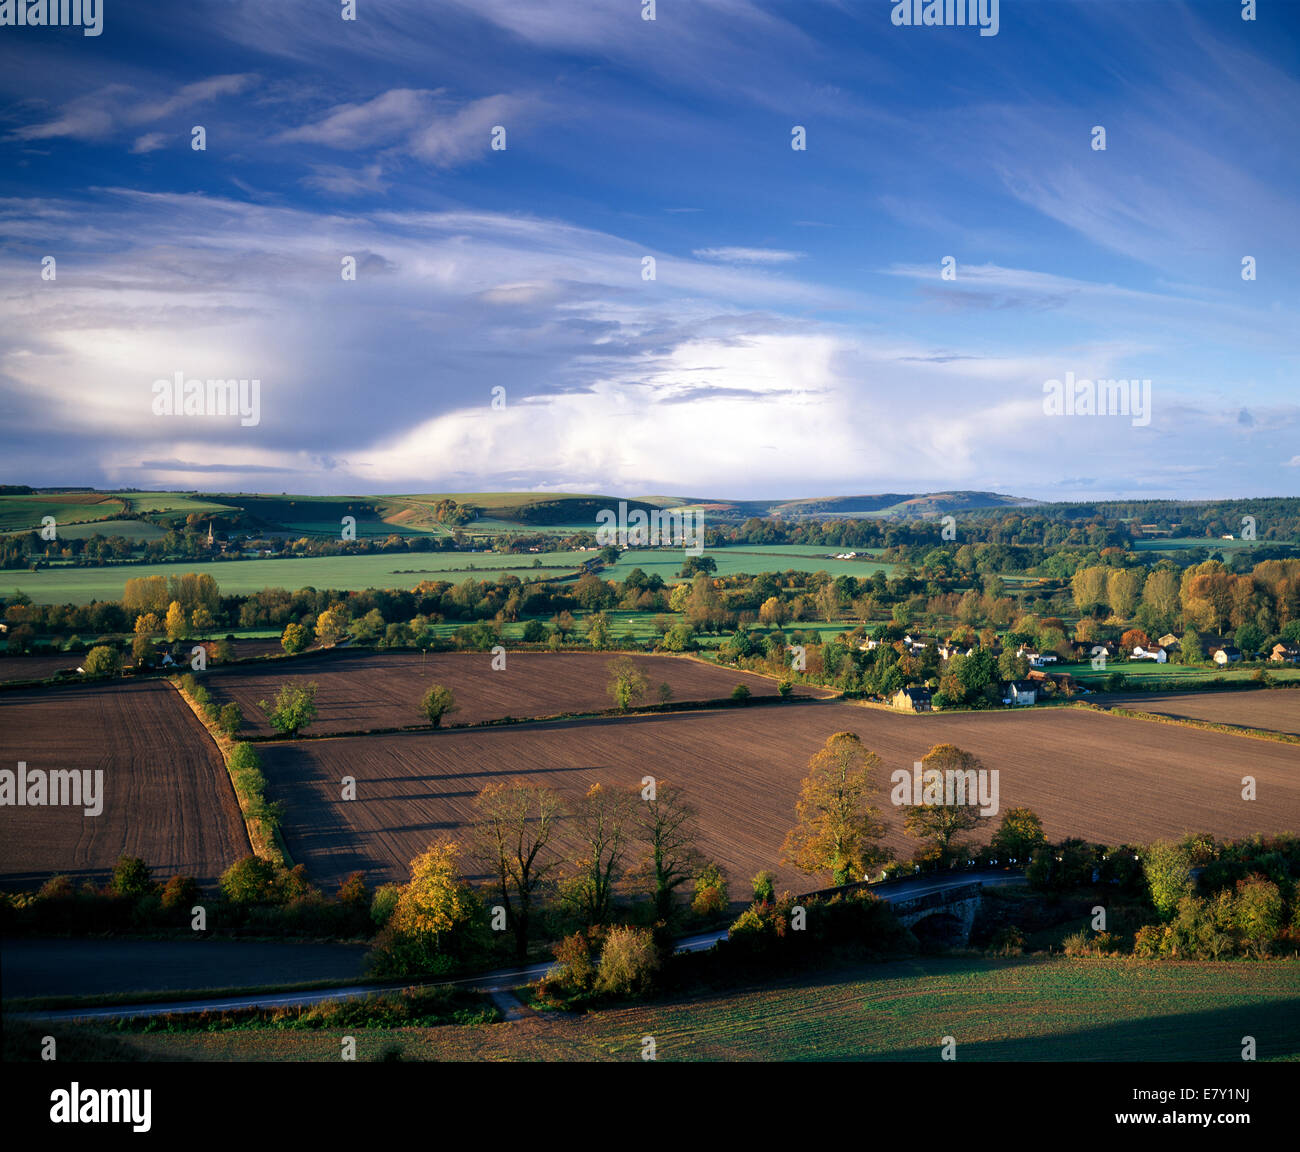 A view of the Wylye Valley in Wiltshire including the village of Norton Bavant. Stock Photo